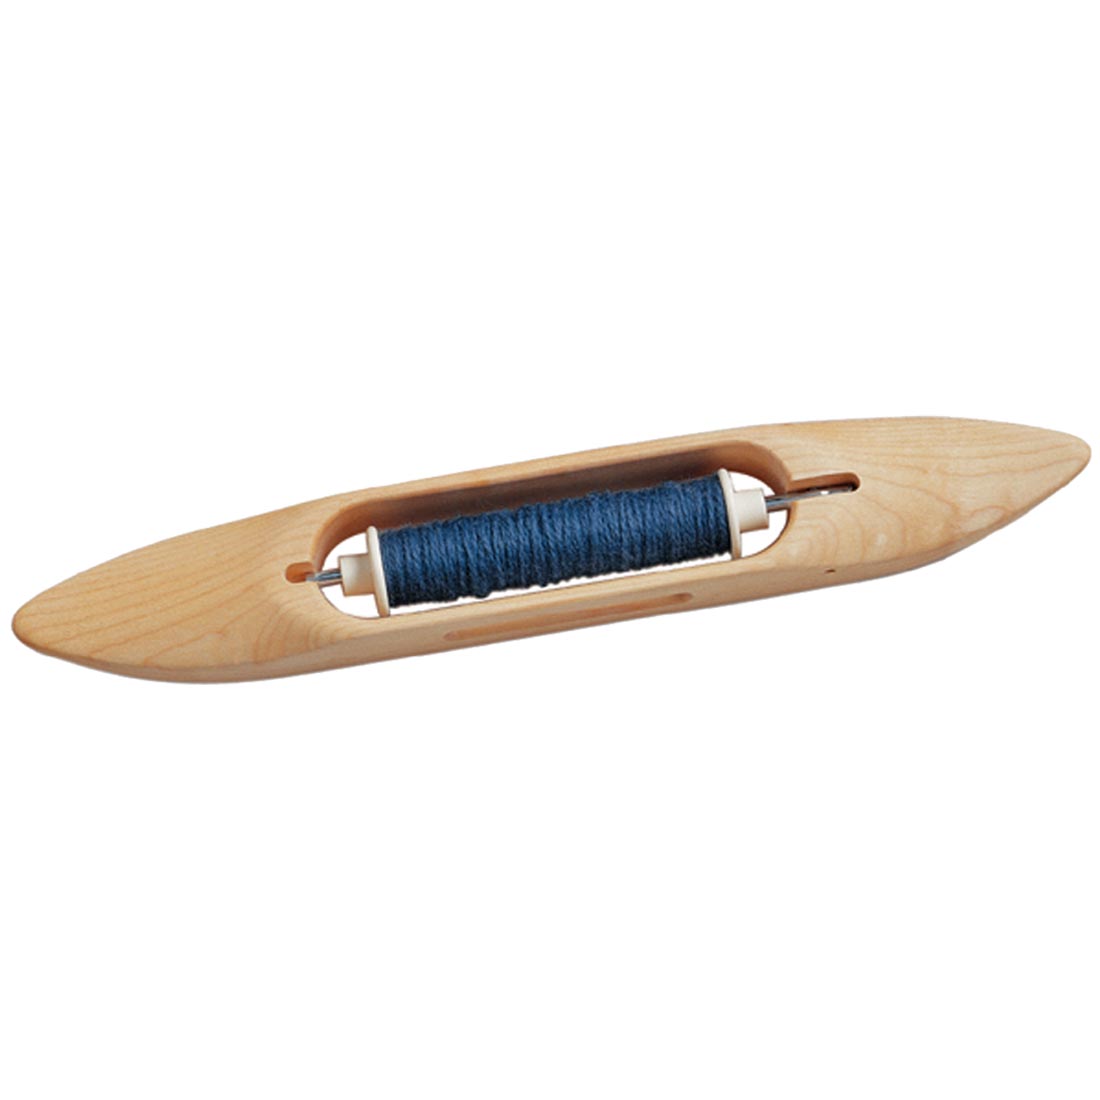 Schacht Spindle Co. Boat Shuttle threaded with yarn